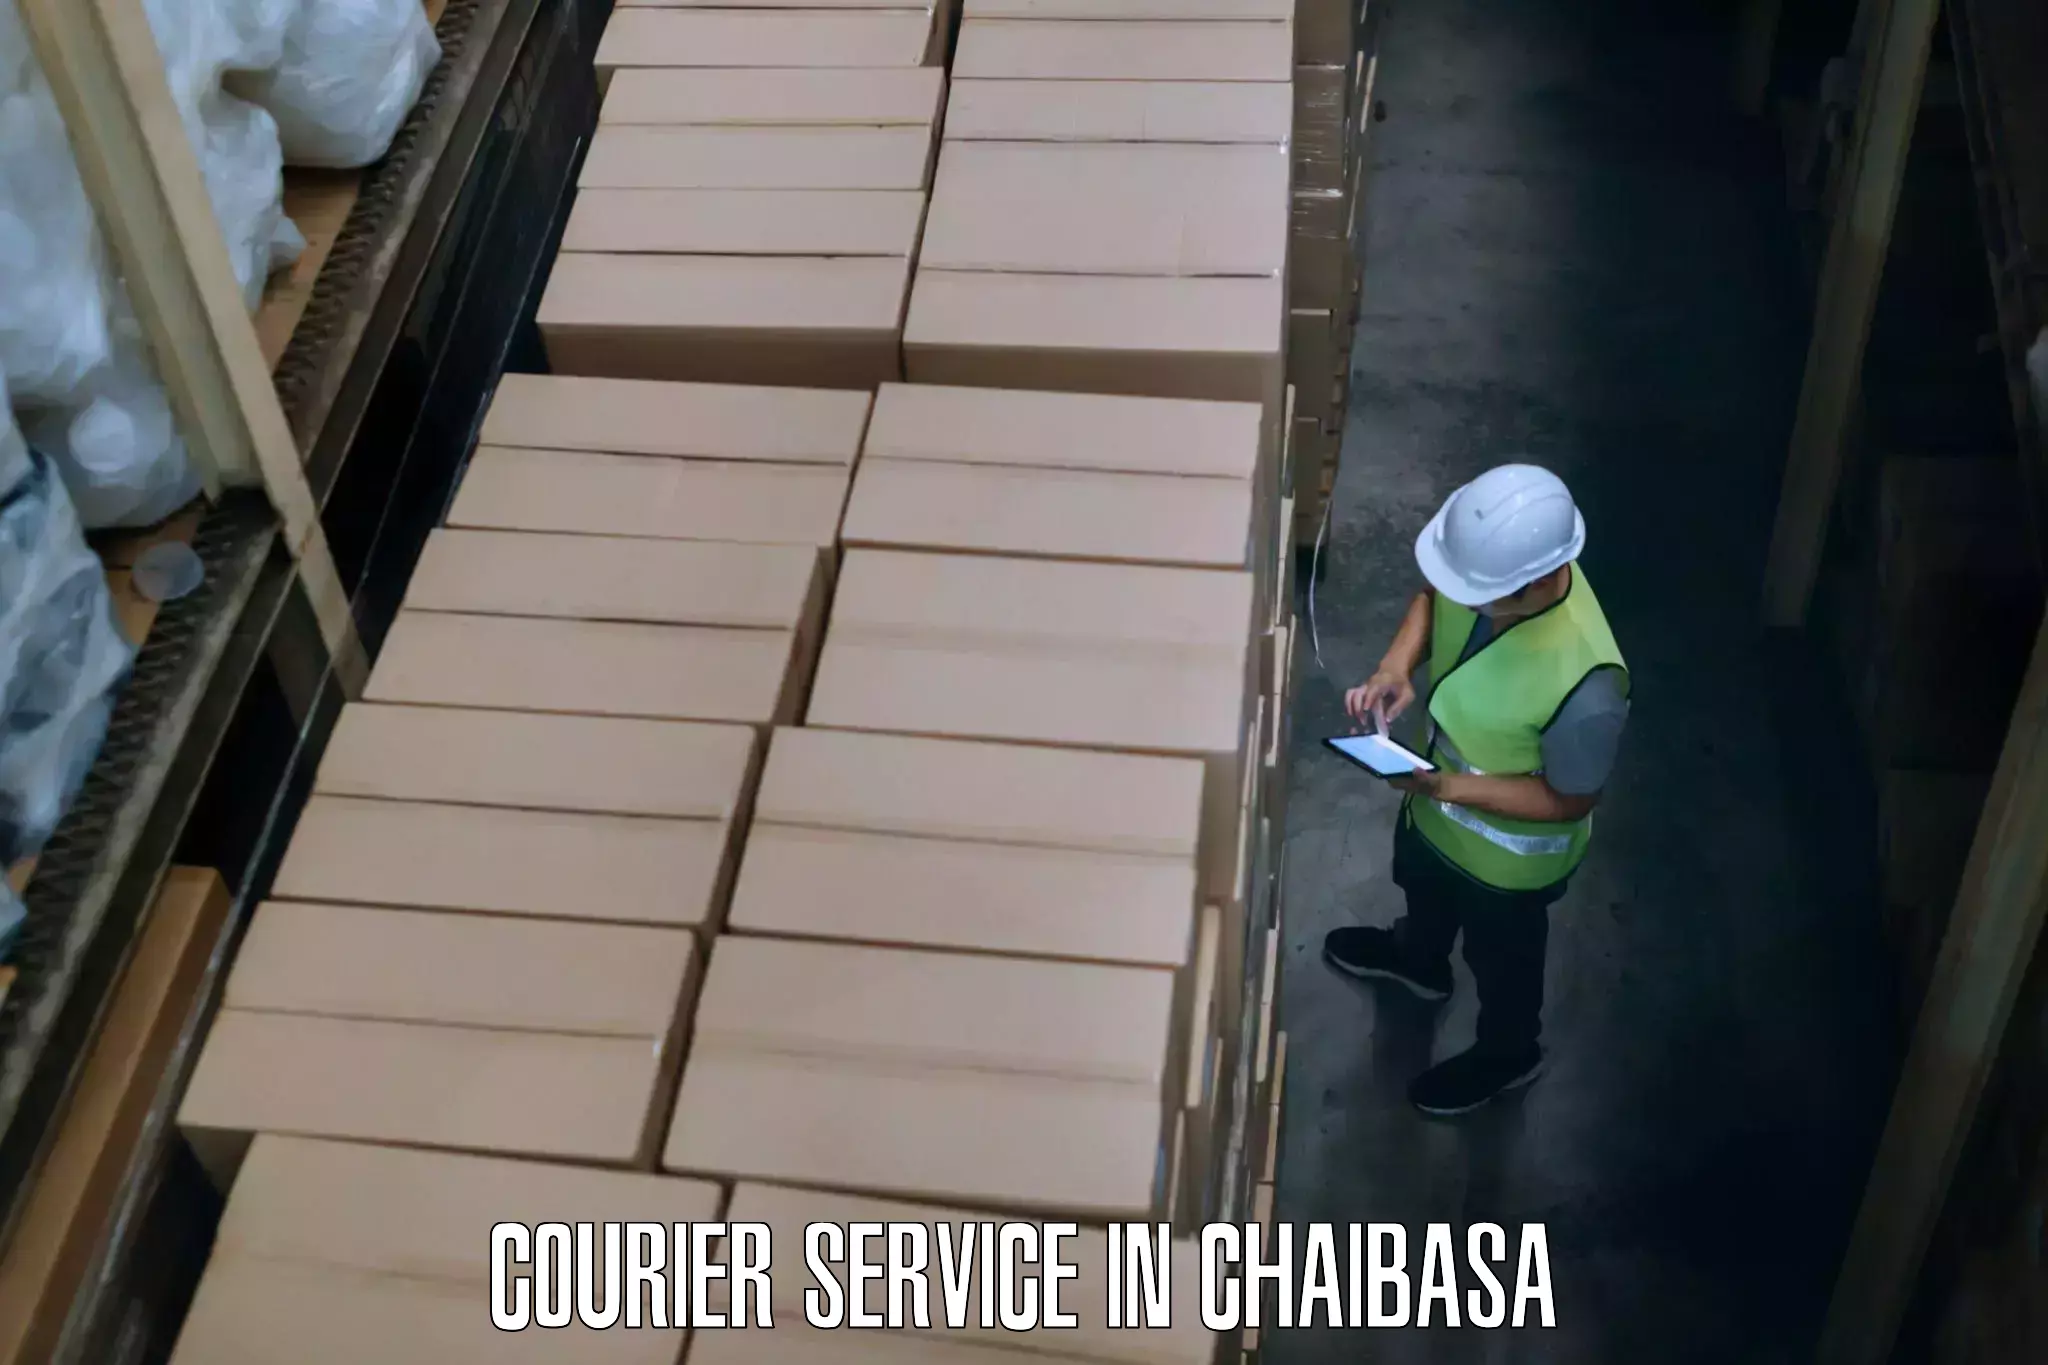 Courier service innovation in Chaibasa